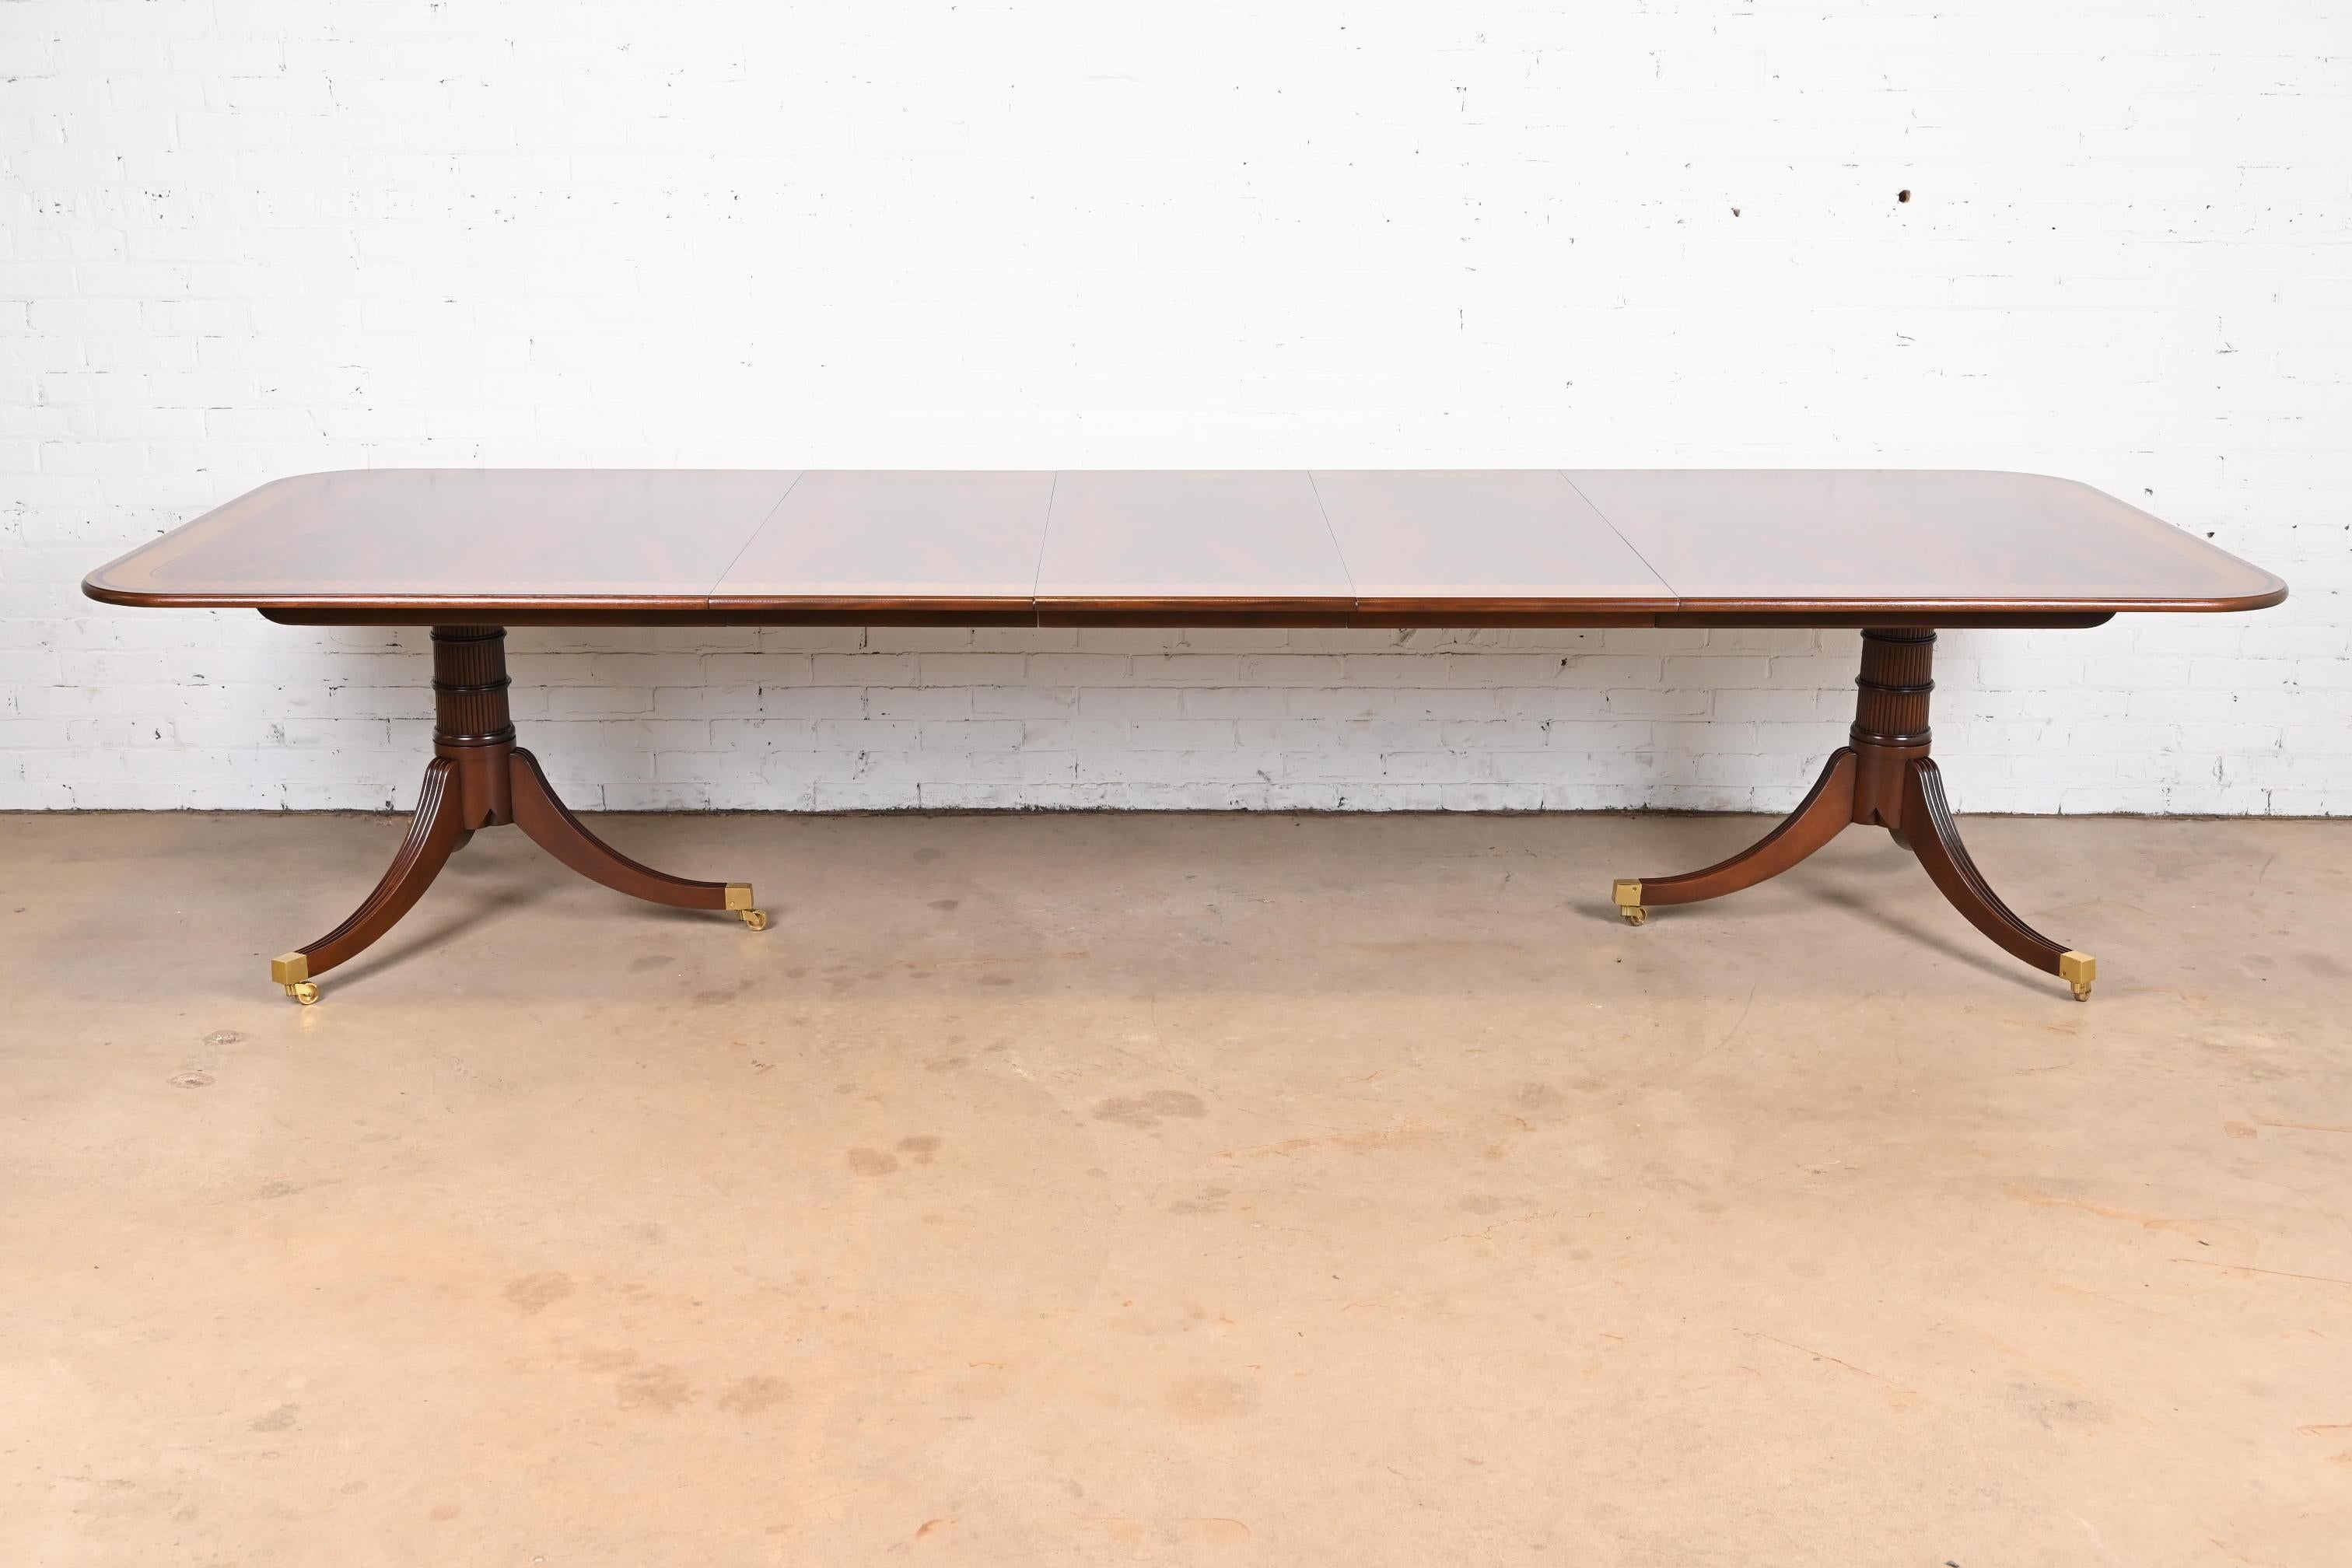 A rare and outstanding Georgian or Regency style double pedestal extension dining table

By Baker Furniture, 